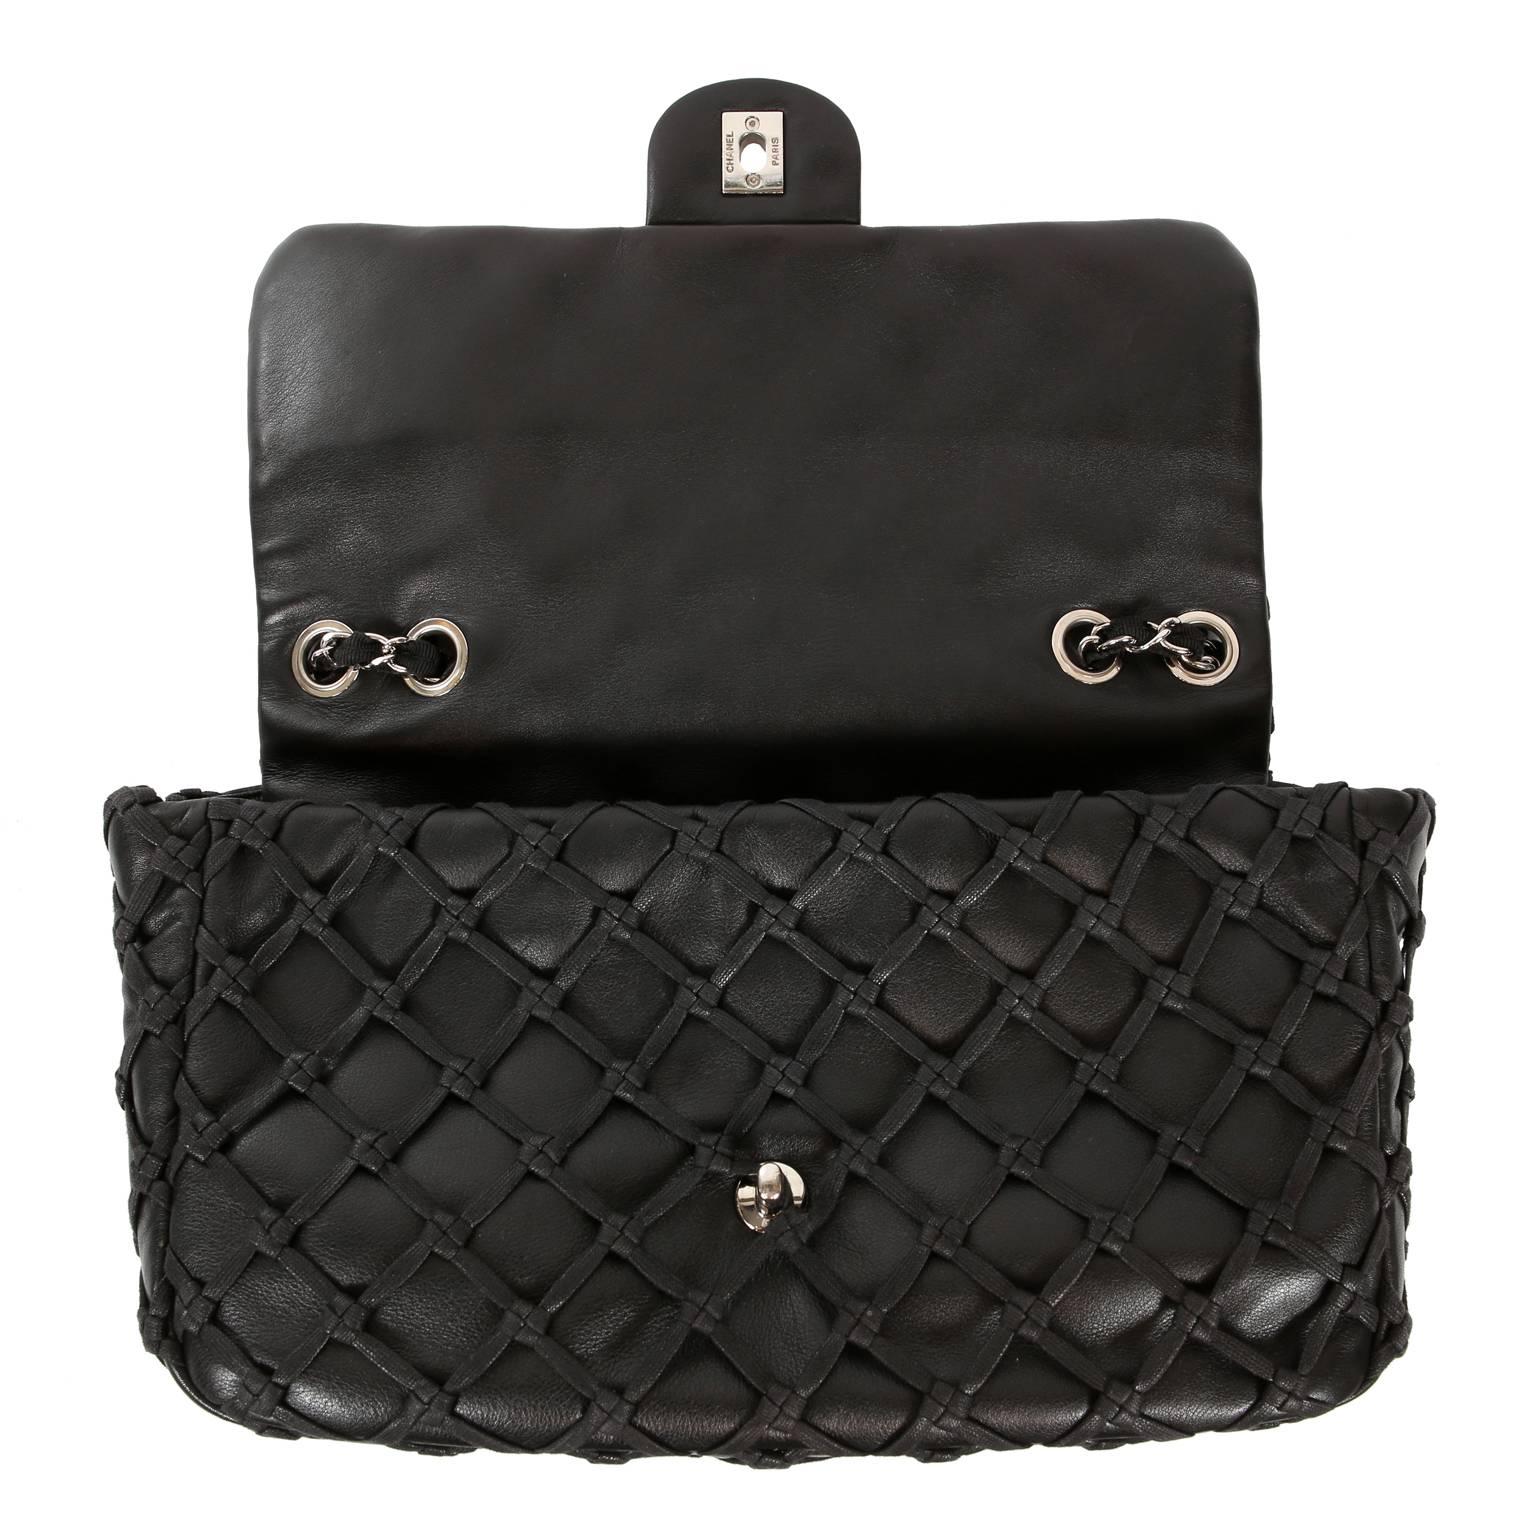 Chanel Black Leather Woven Top Stitch Classic Flap Bag 5